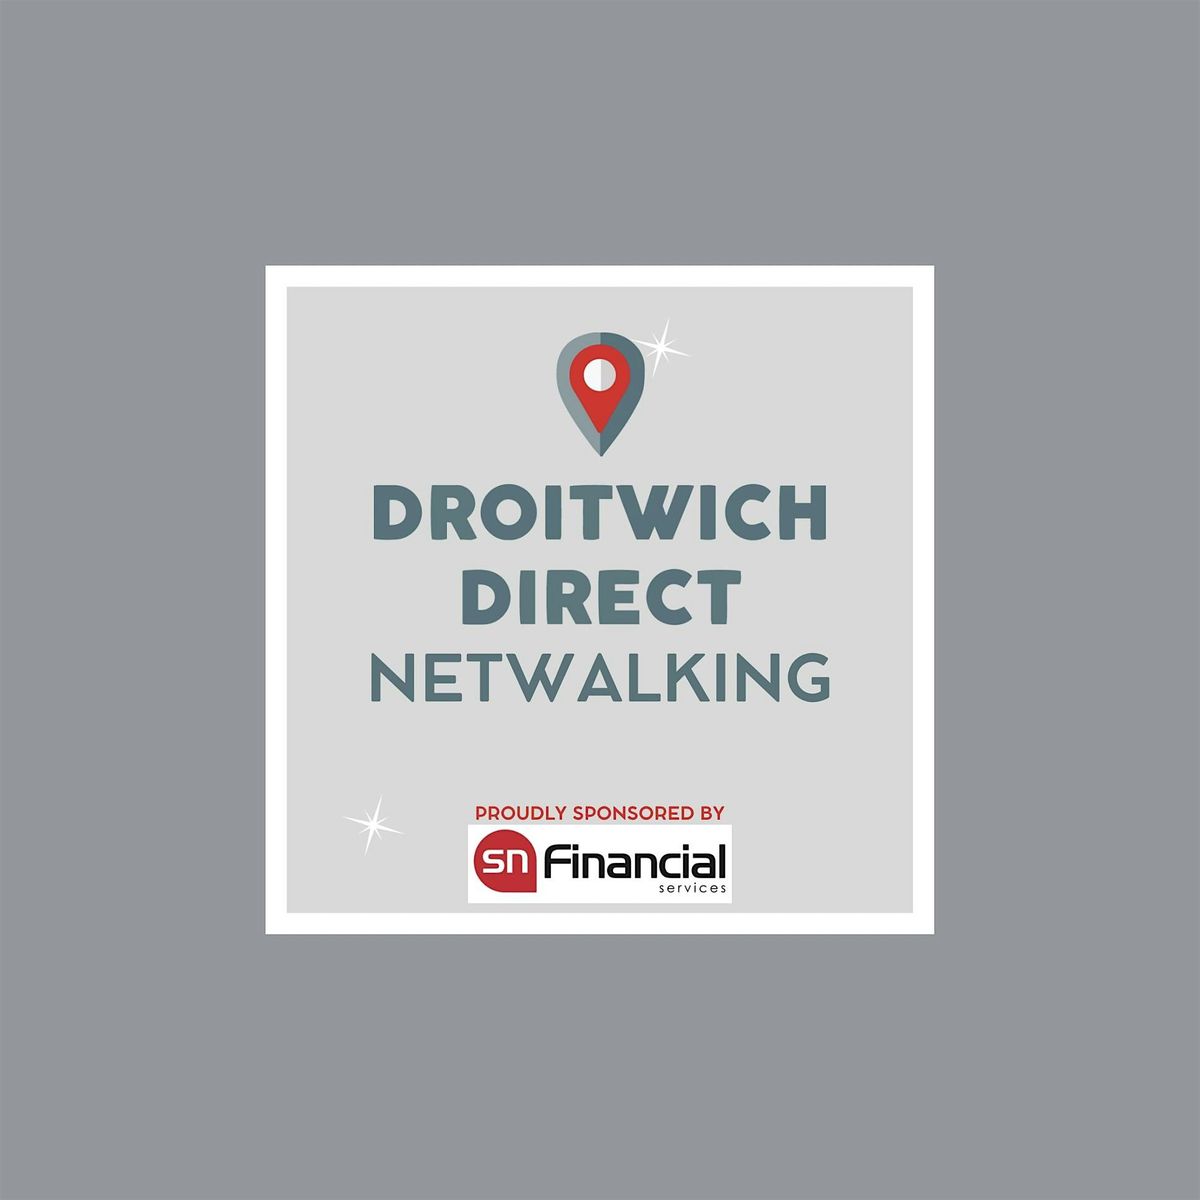 Droitwich Direct Netwalking